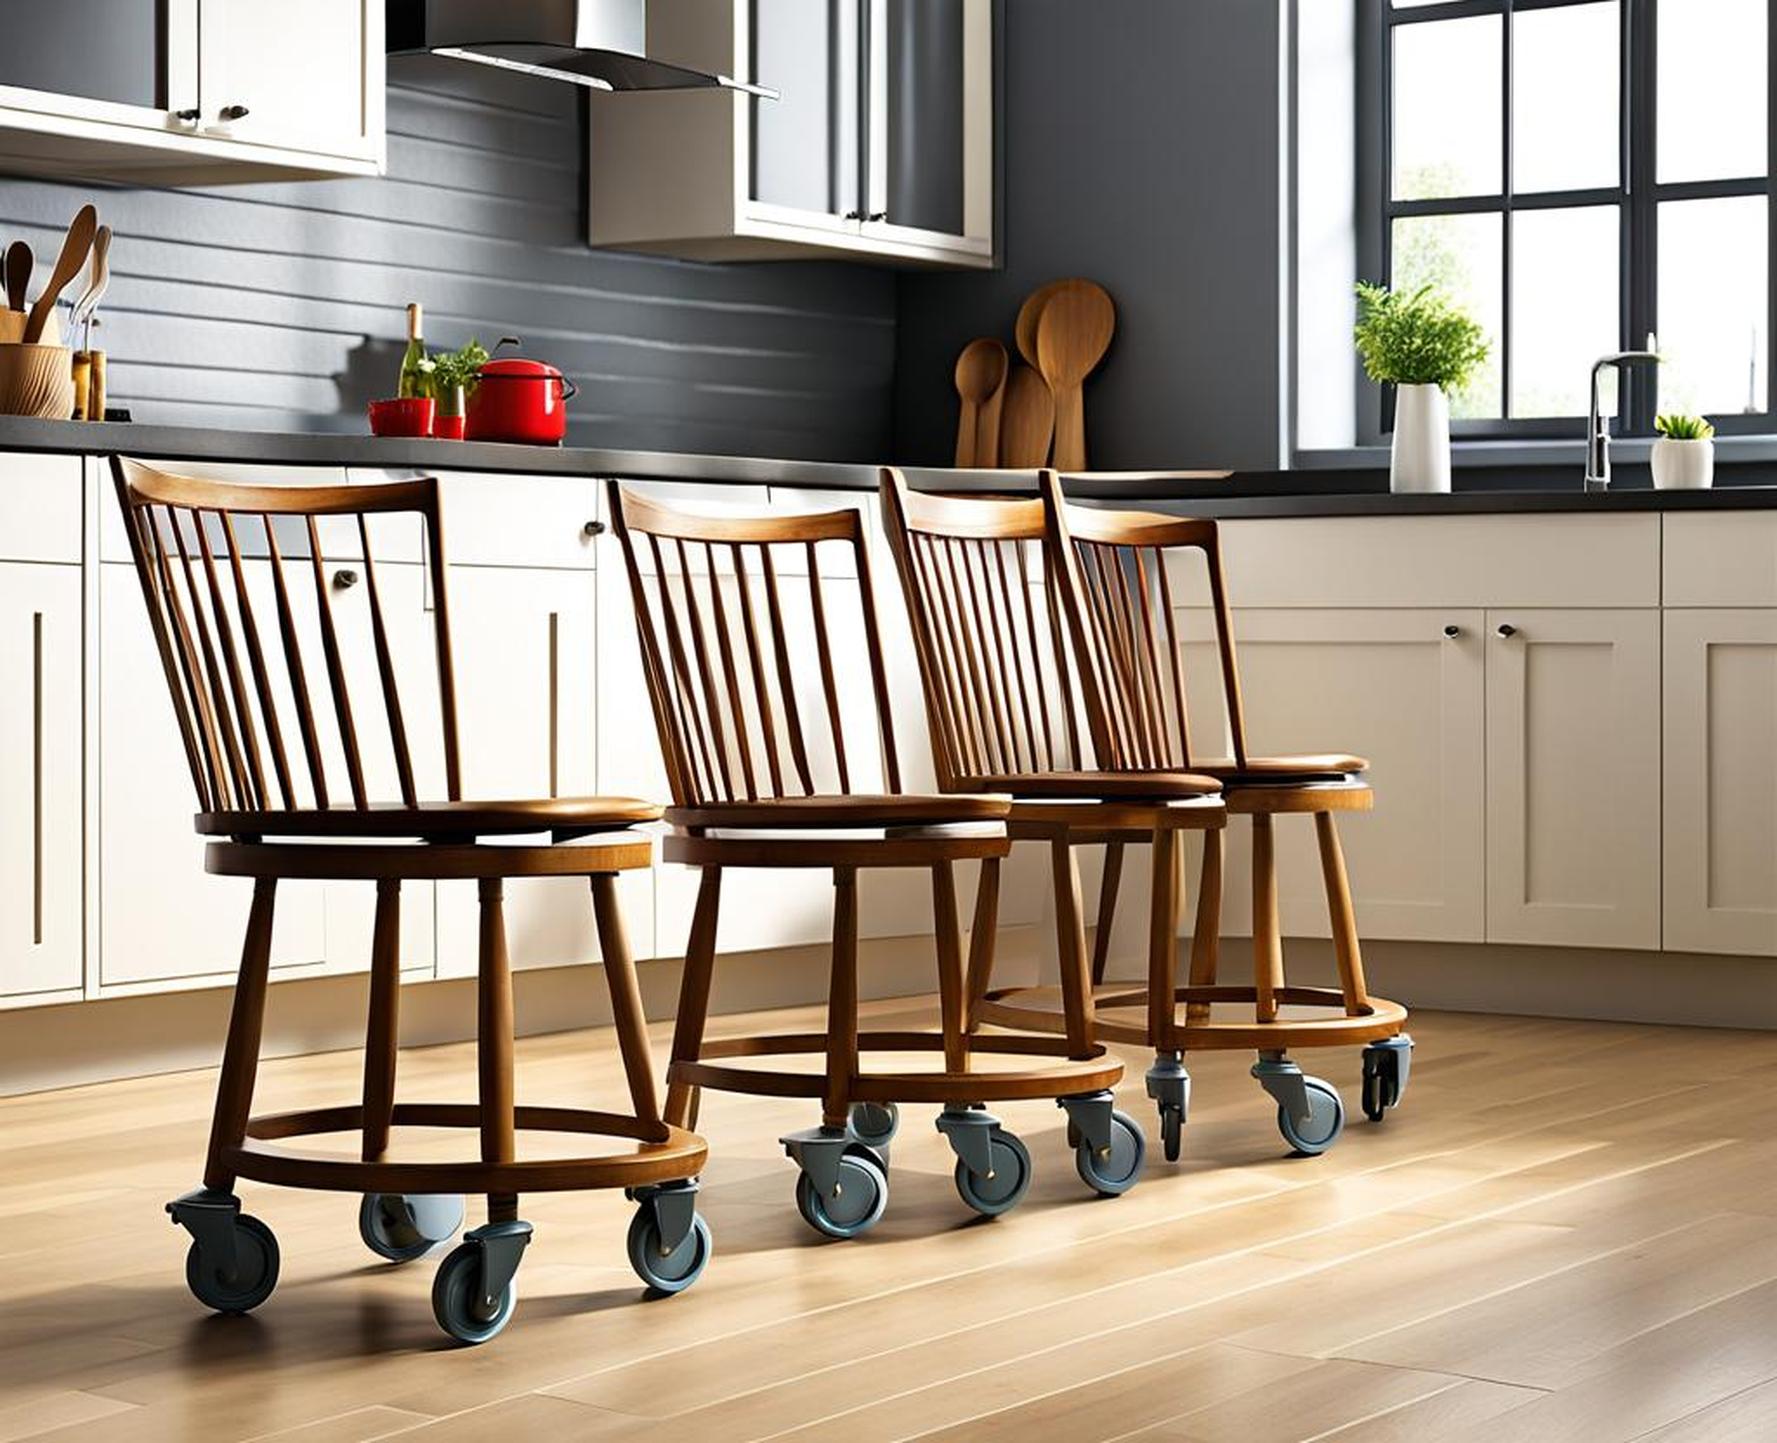 kitchen chairs on rollers